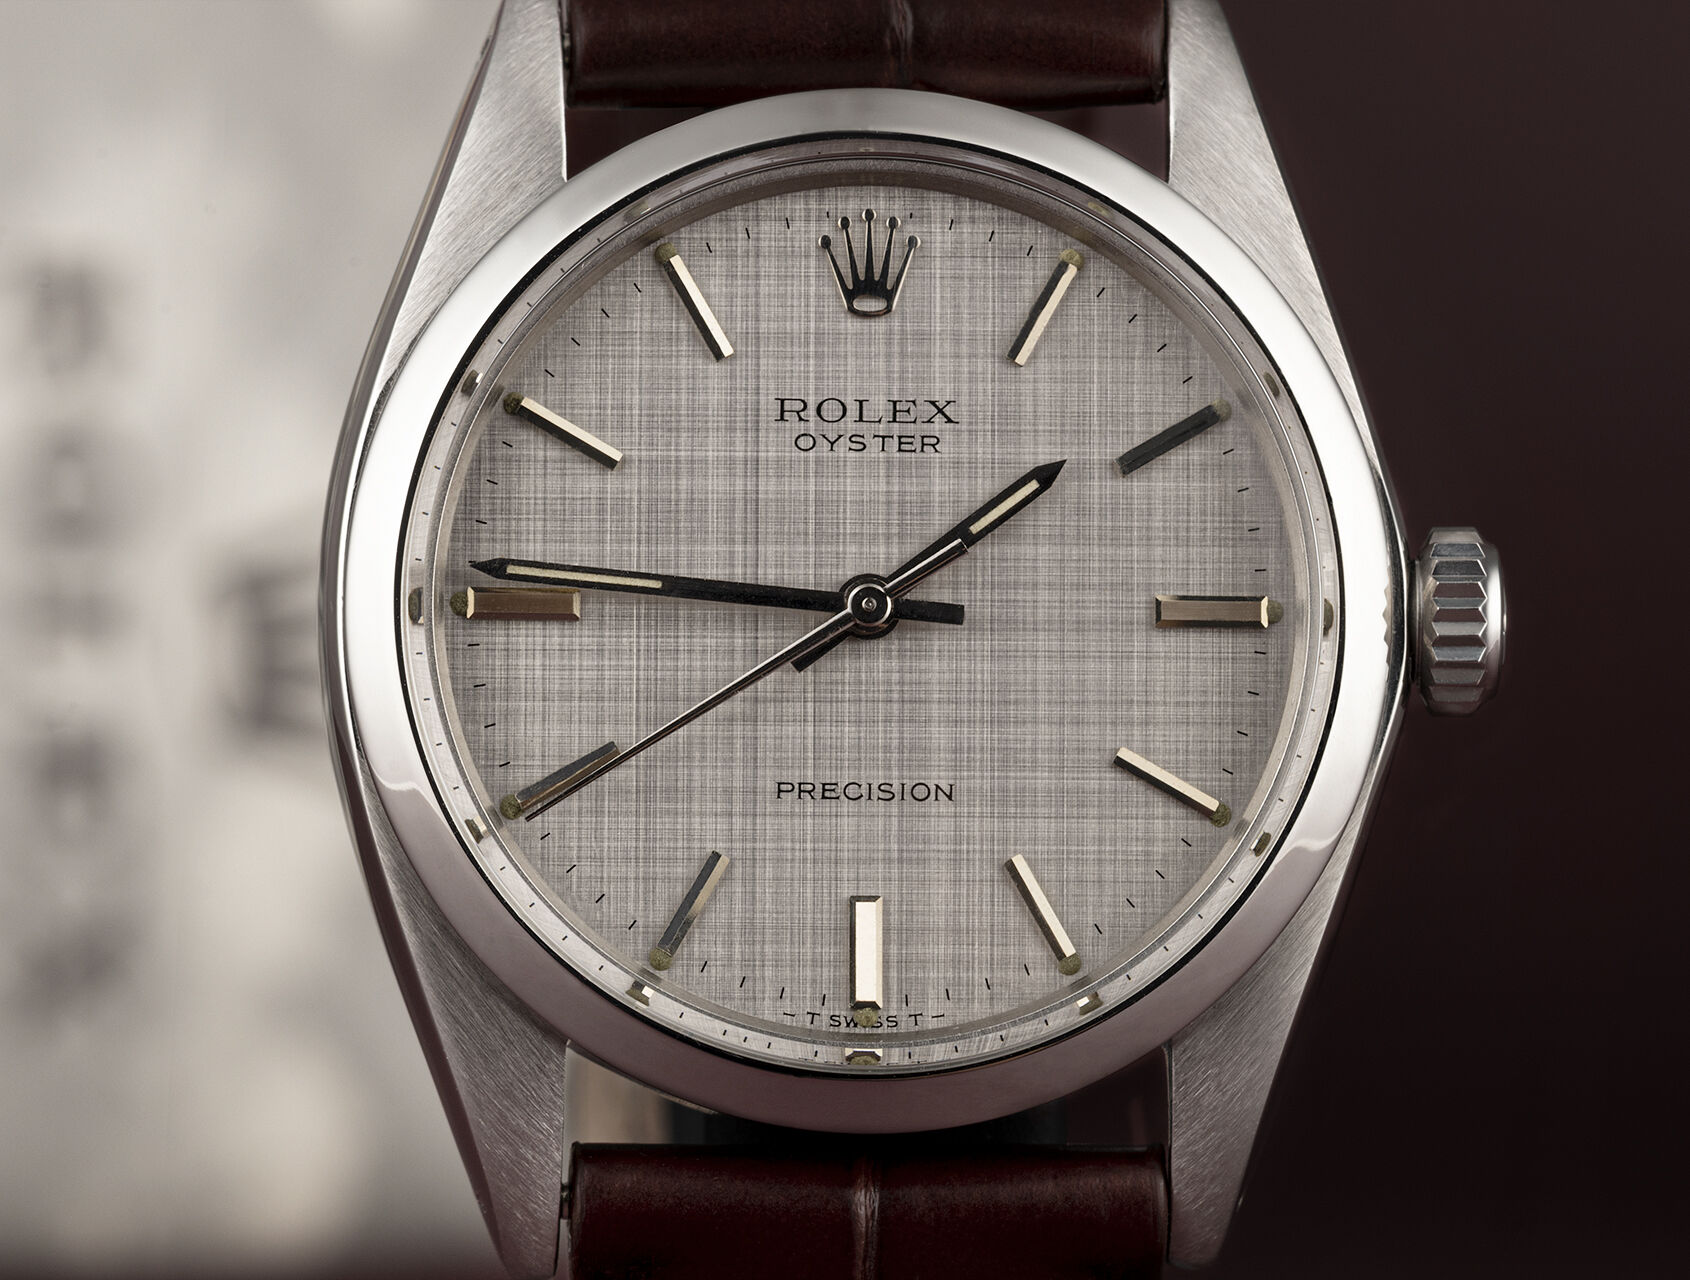 ref 6426 | 6426 - Beautiful Example | Rolex Oyster